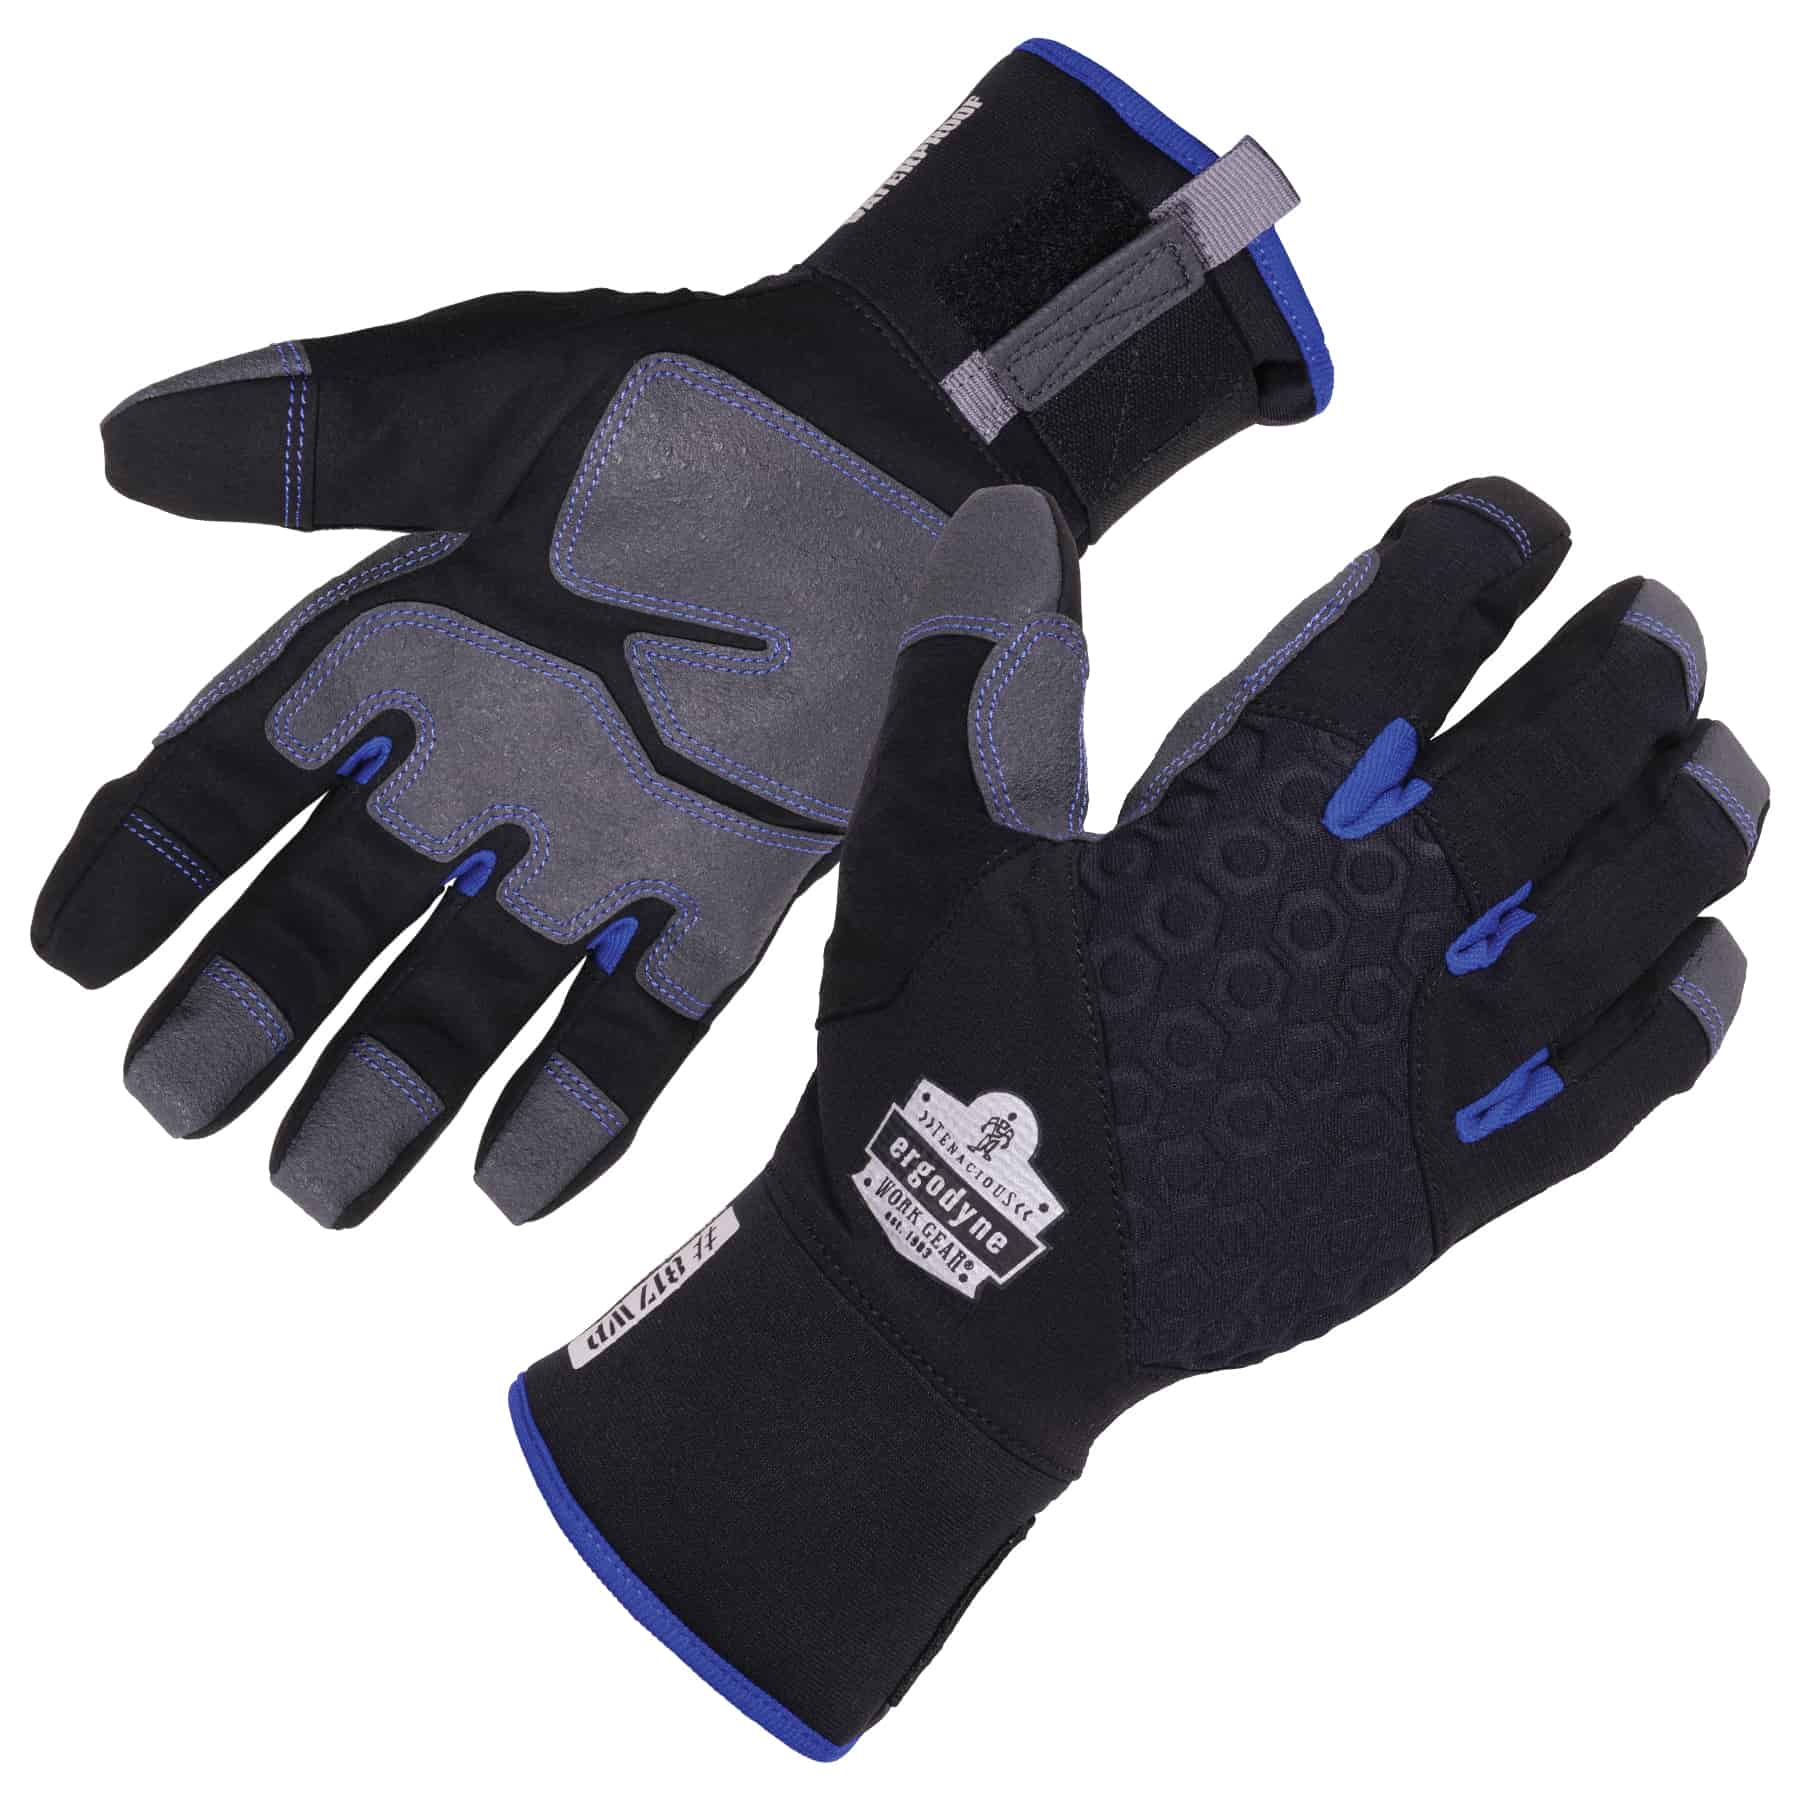 PROFLEX 817WP THERMAL WATERPROOF GLOVES - Insulated Multi-Task Gloves